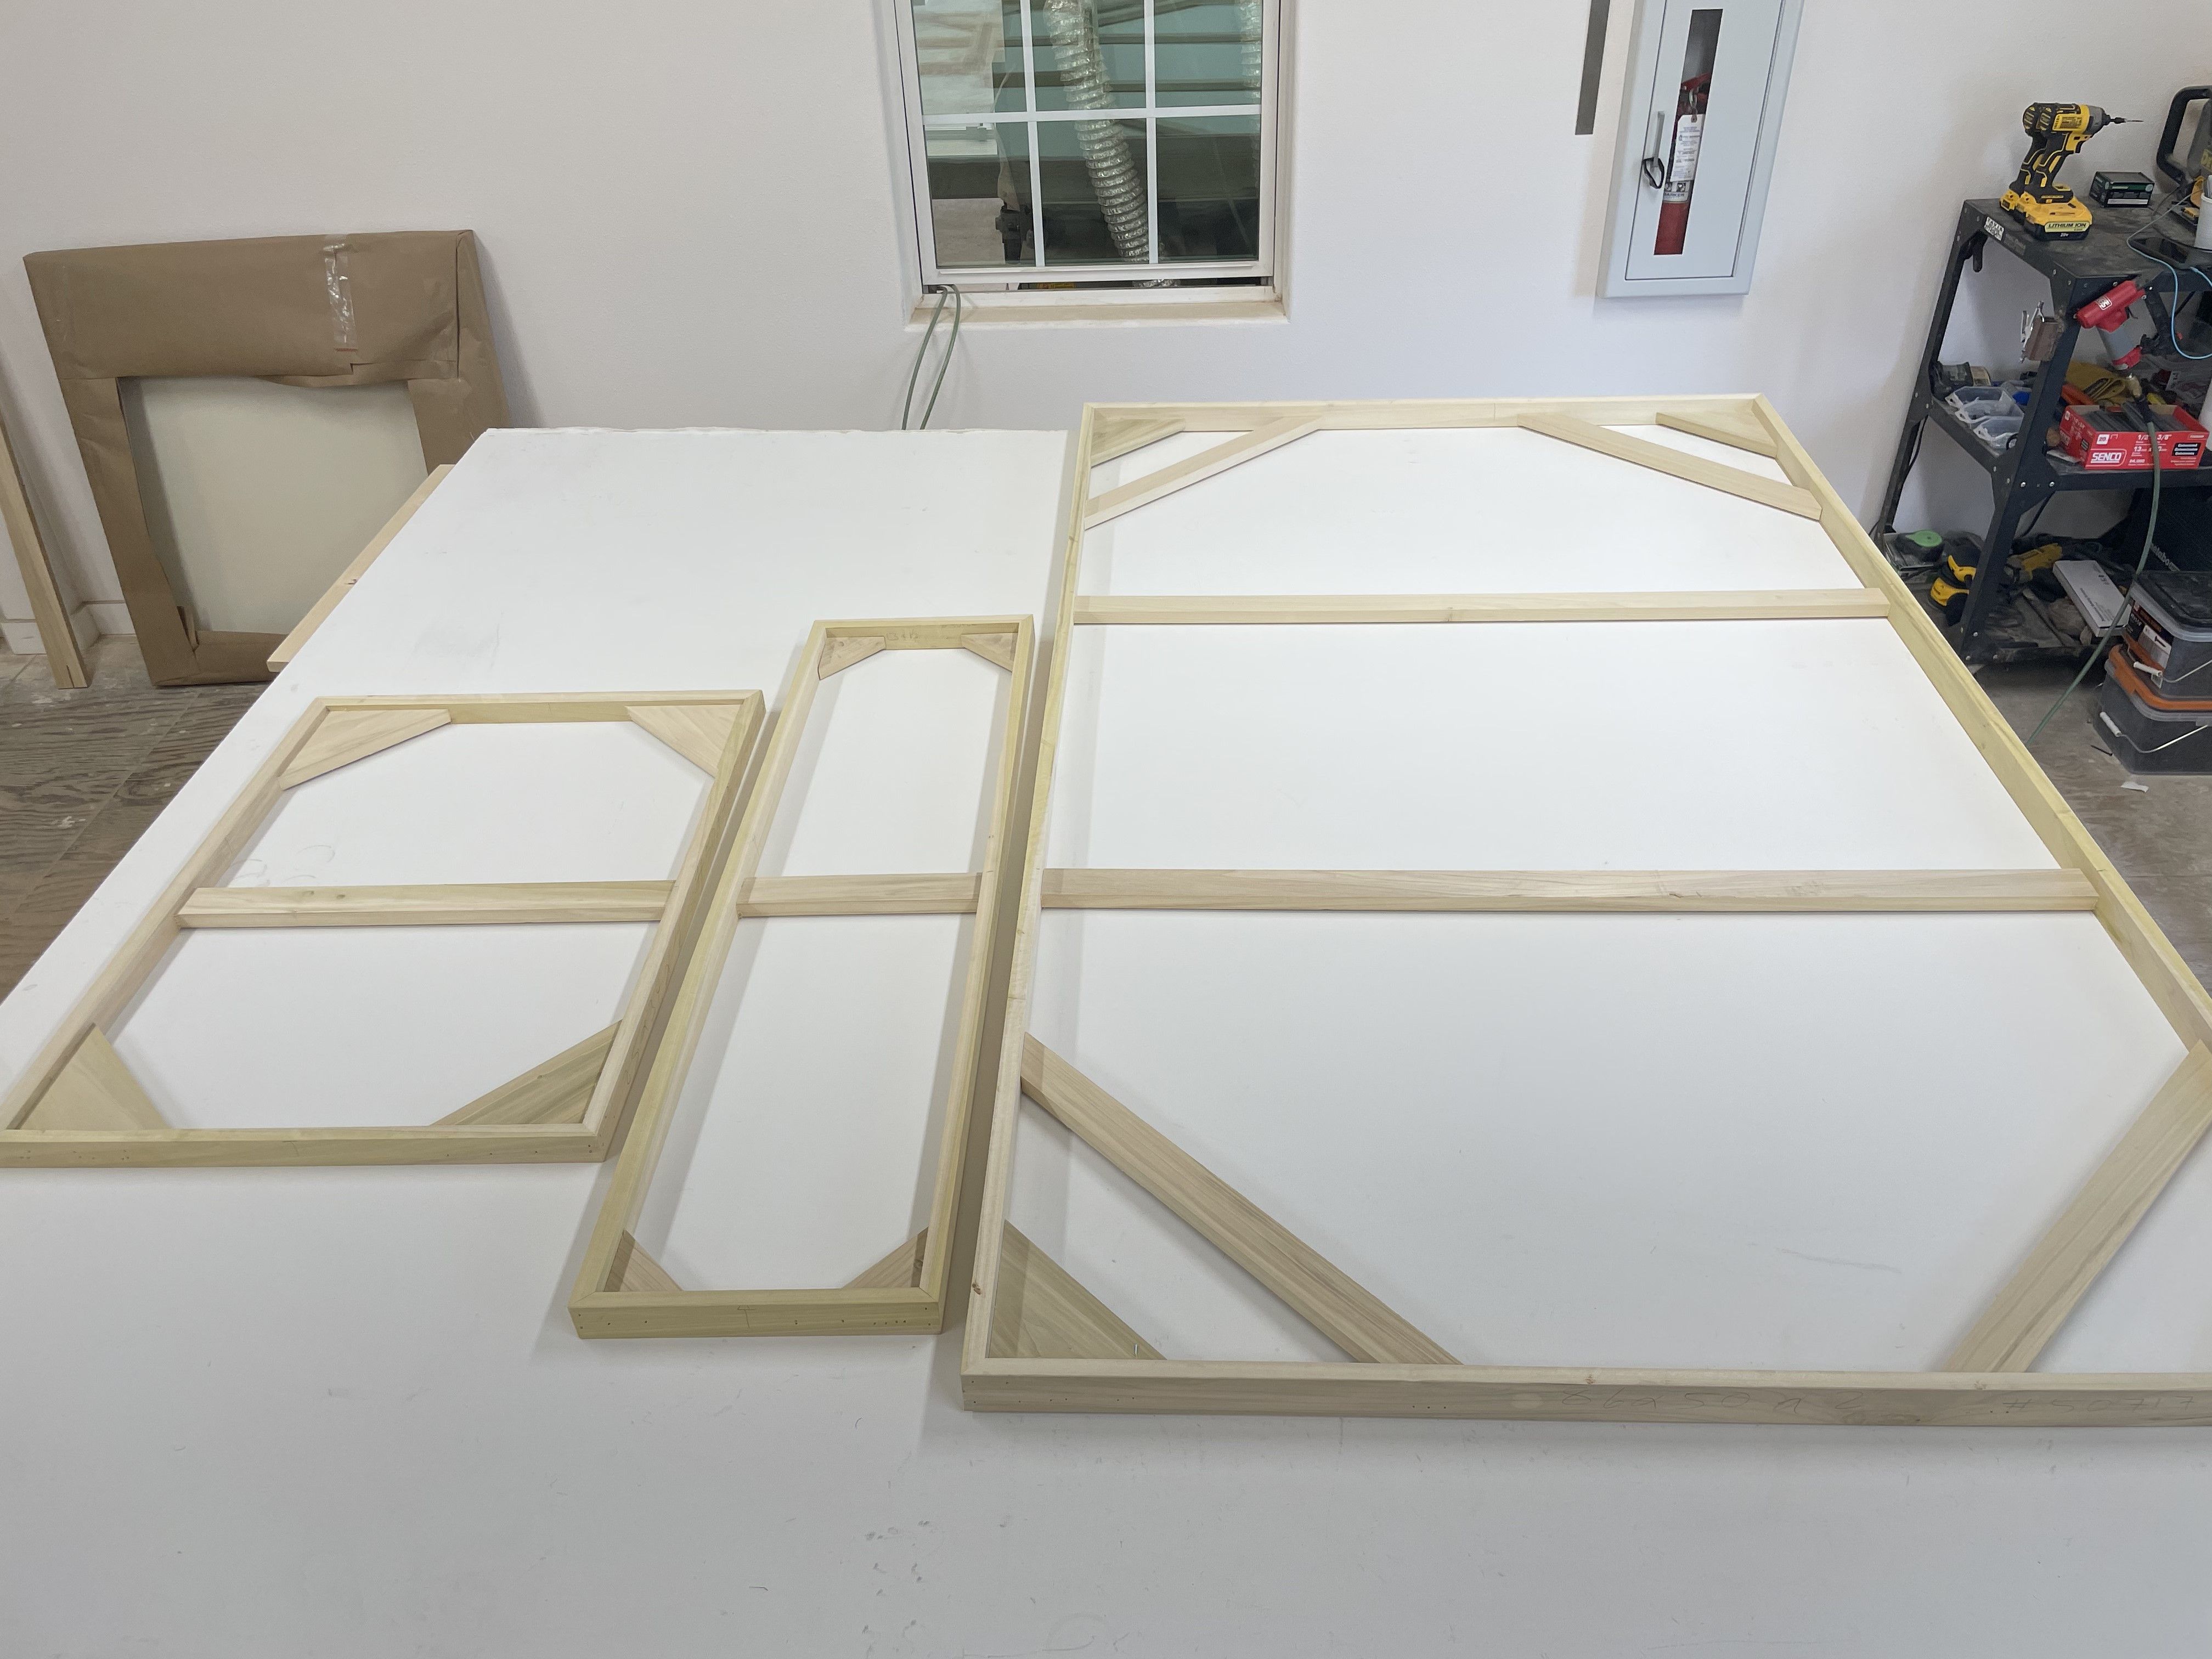 Several sizes of pre-stretched canvases